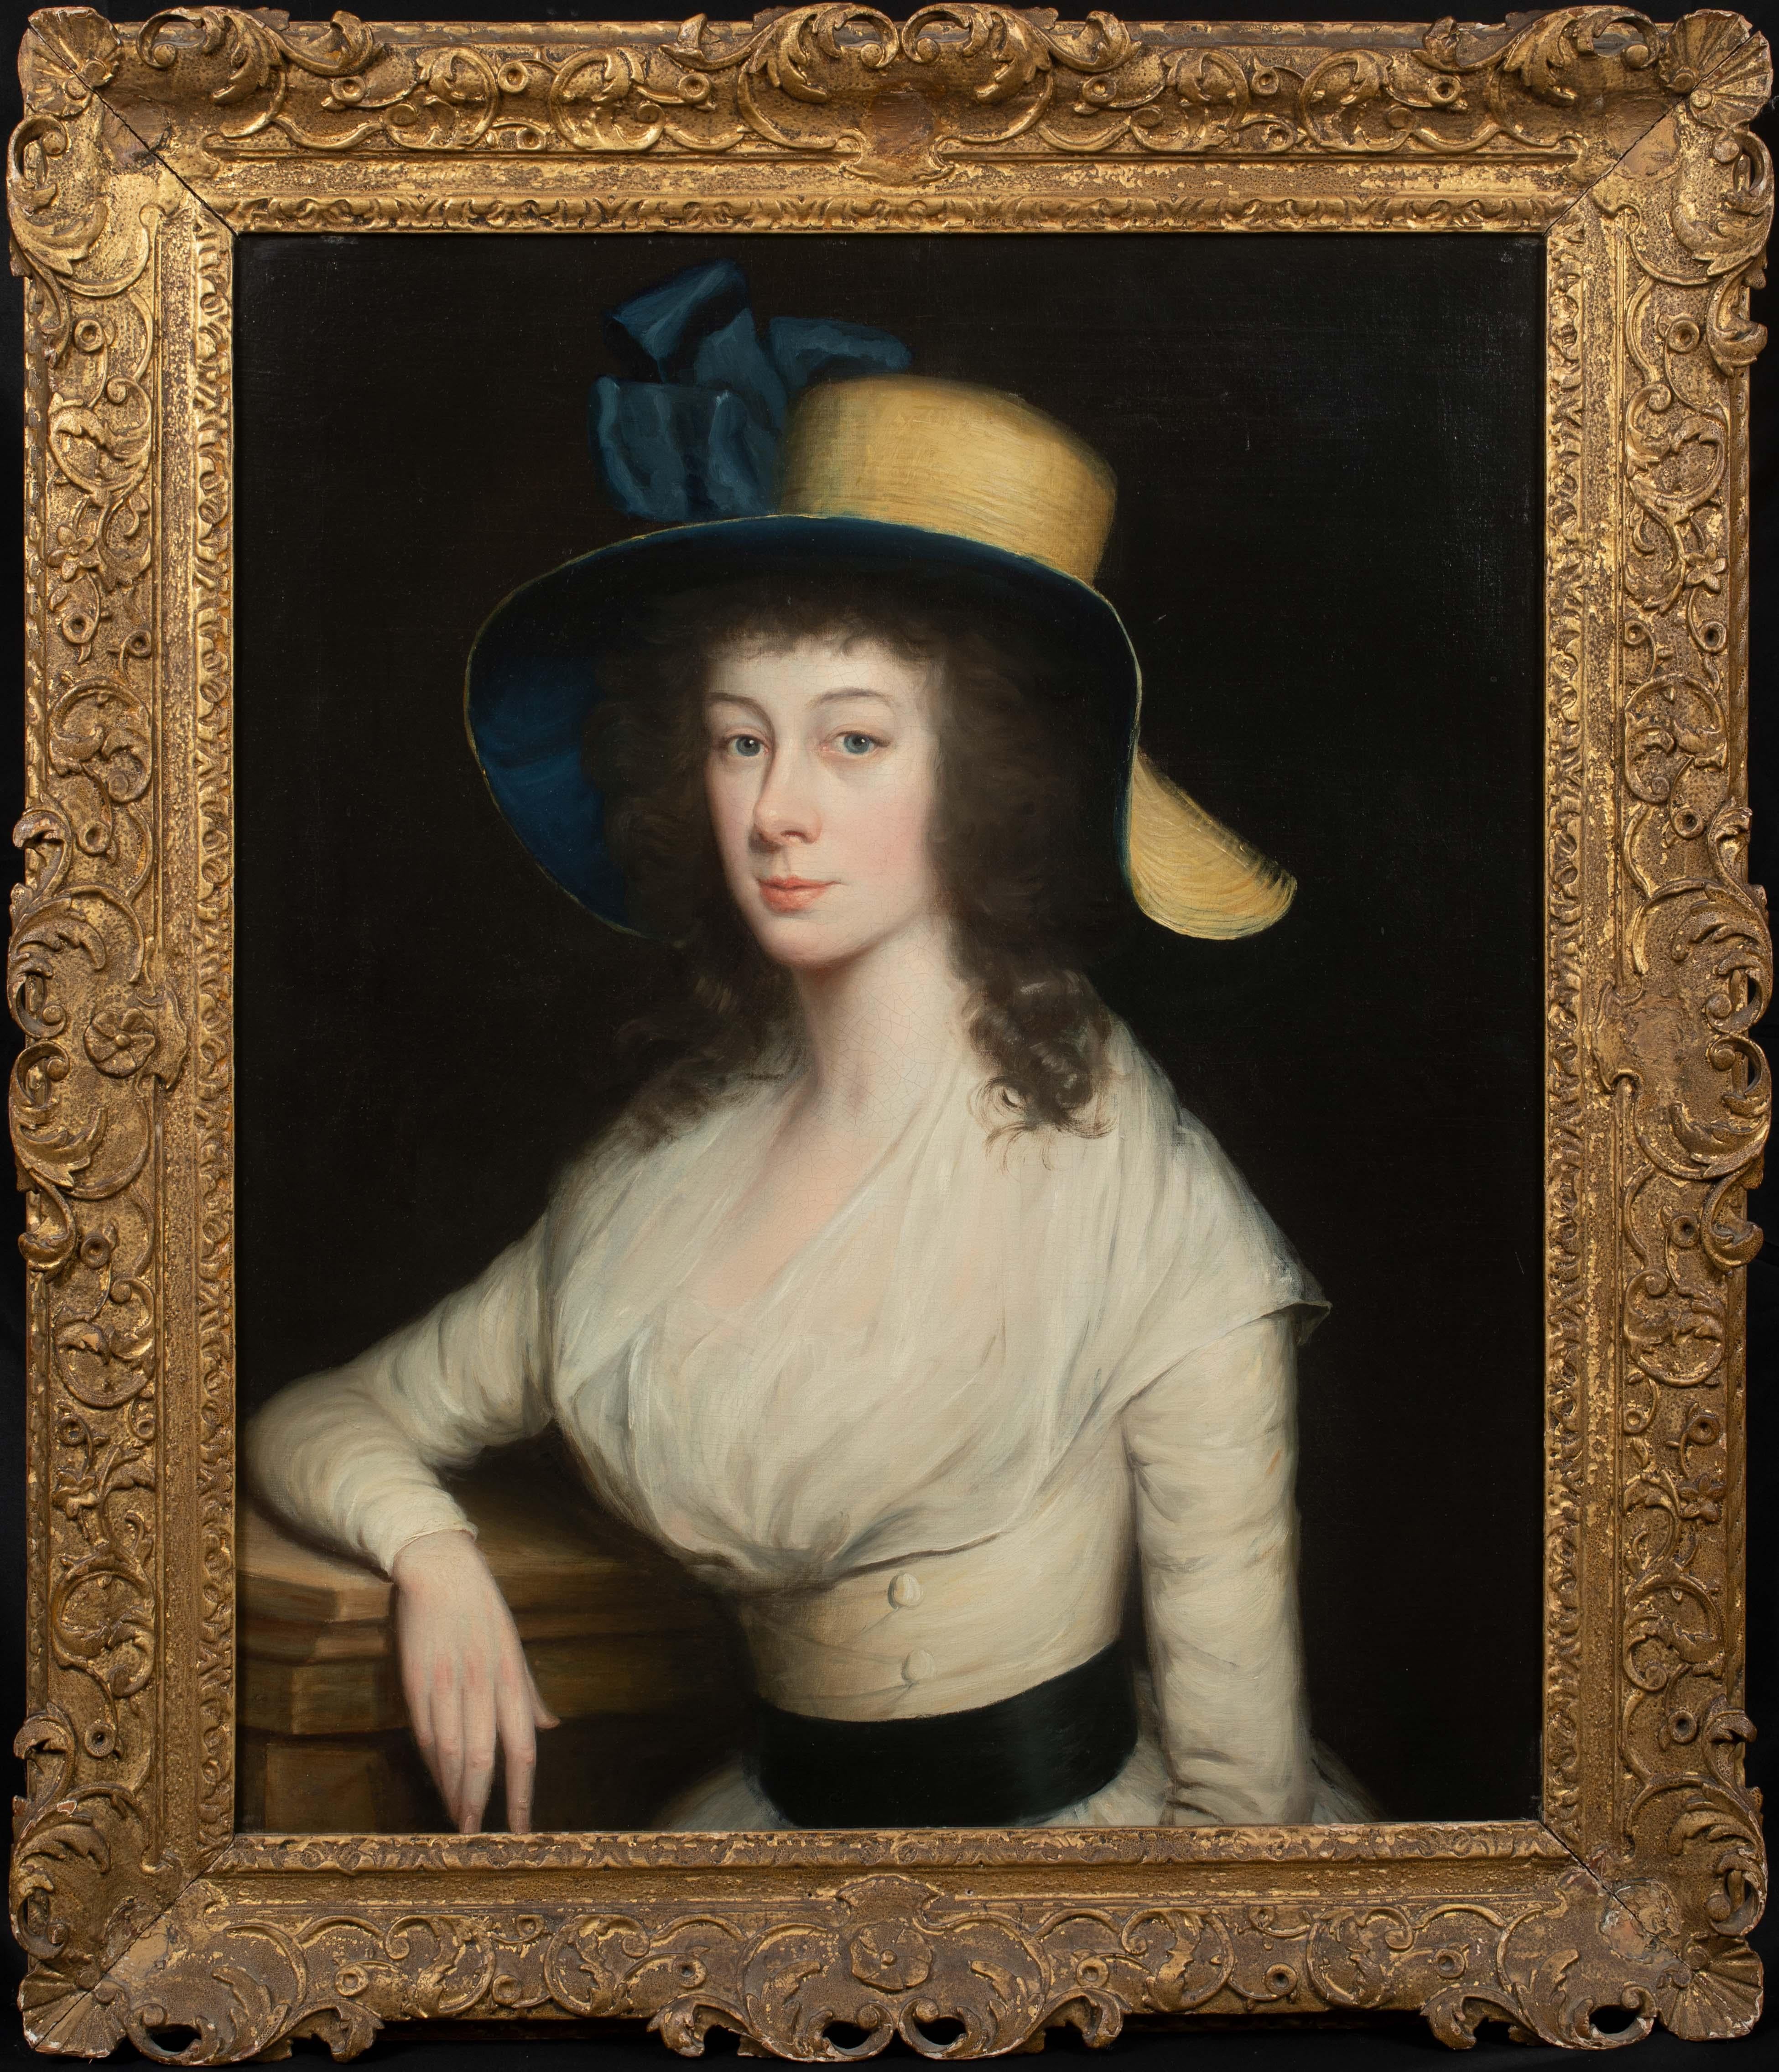 Portrait Of Lady Ann Ward, 18th Century - Painting by Allan Ramsay